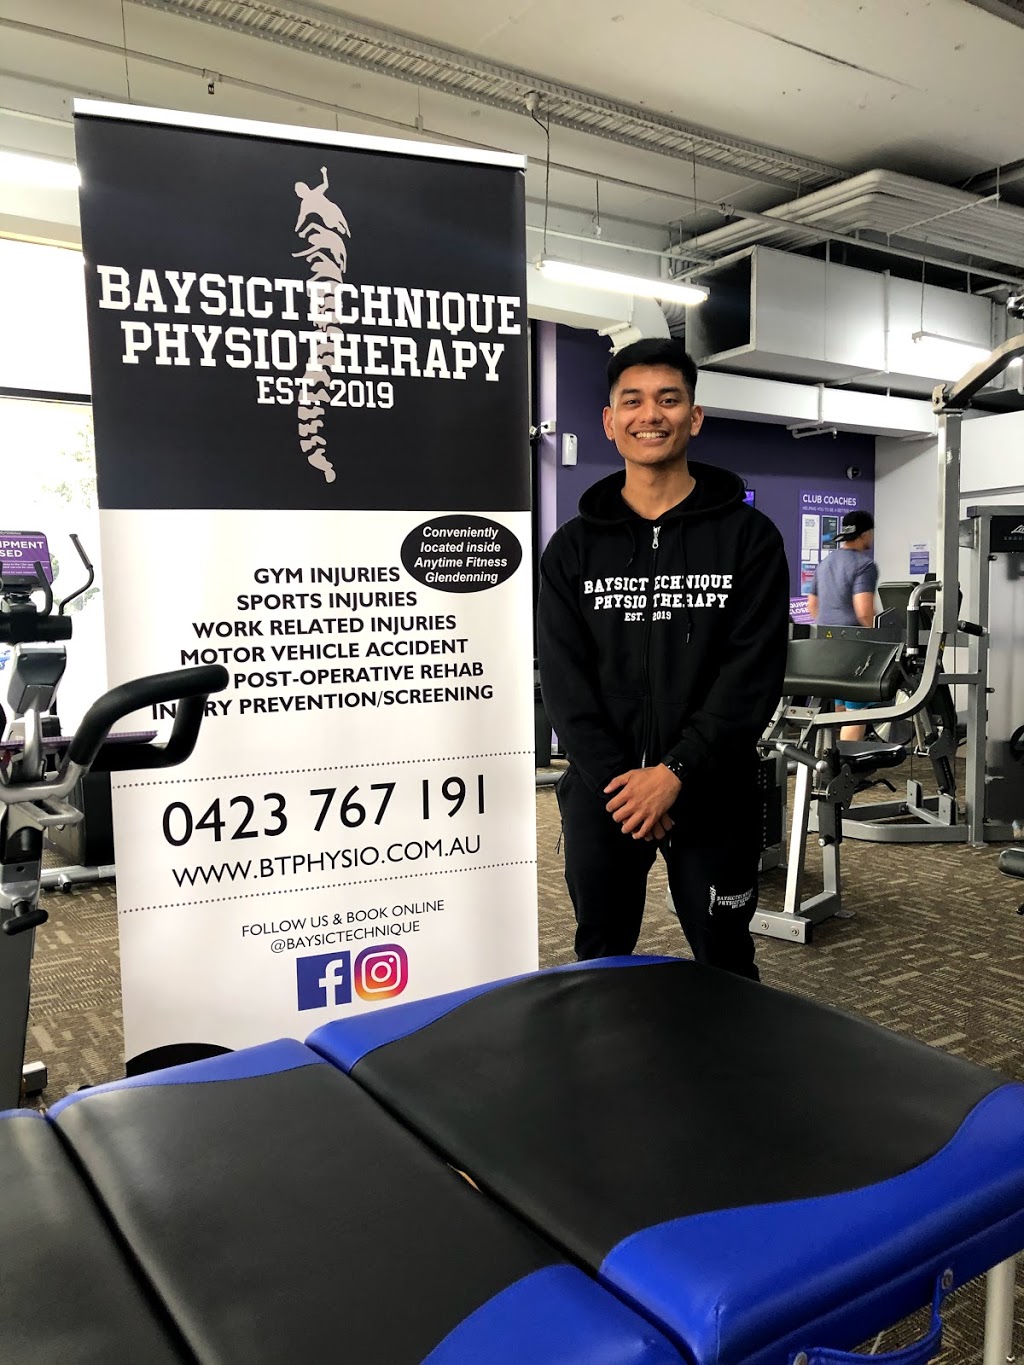 Baysictechnique Physiotherapy & Sports Medicine | physiotherapist | 6/197 Power St, Glendenning NSW 2761, Australia | 0423767191 OR +61 423 767 191